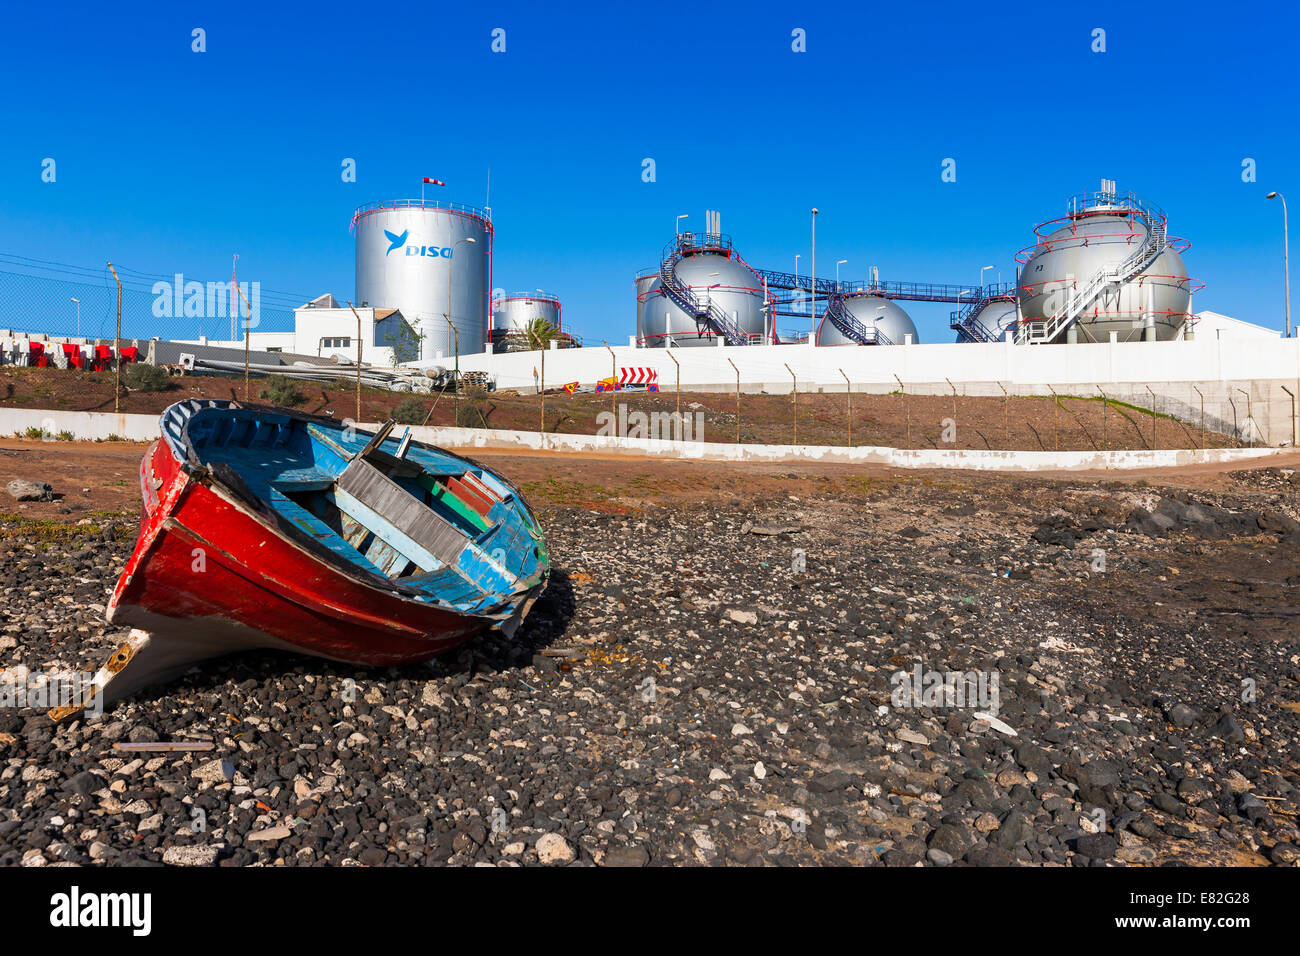 Spain, Canary Islands, Lanzarote, Arrecife, industrial plant of Disa company, wooden boat on seafront Stock Photo